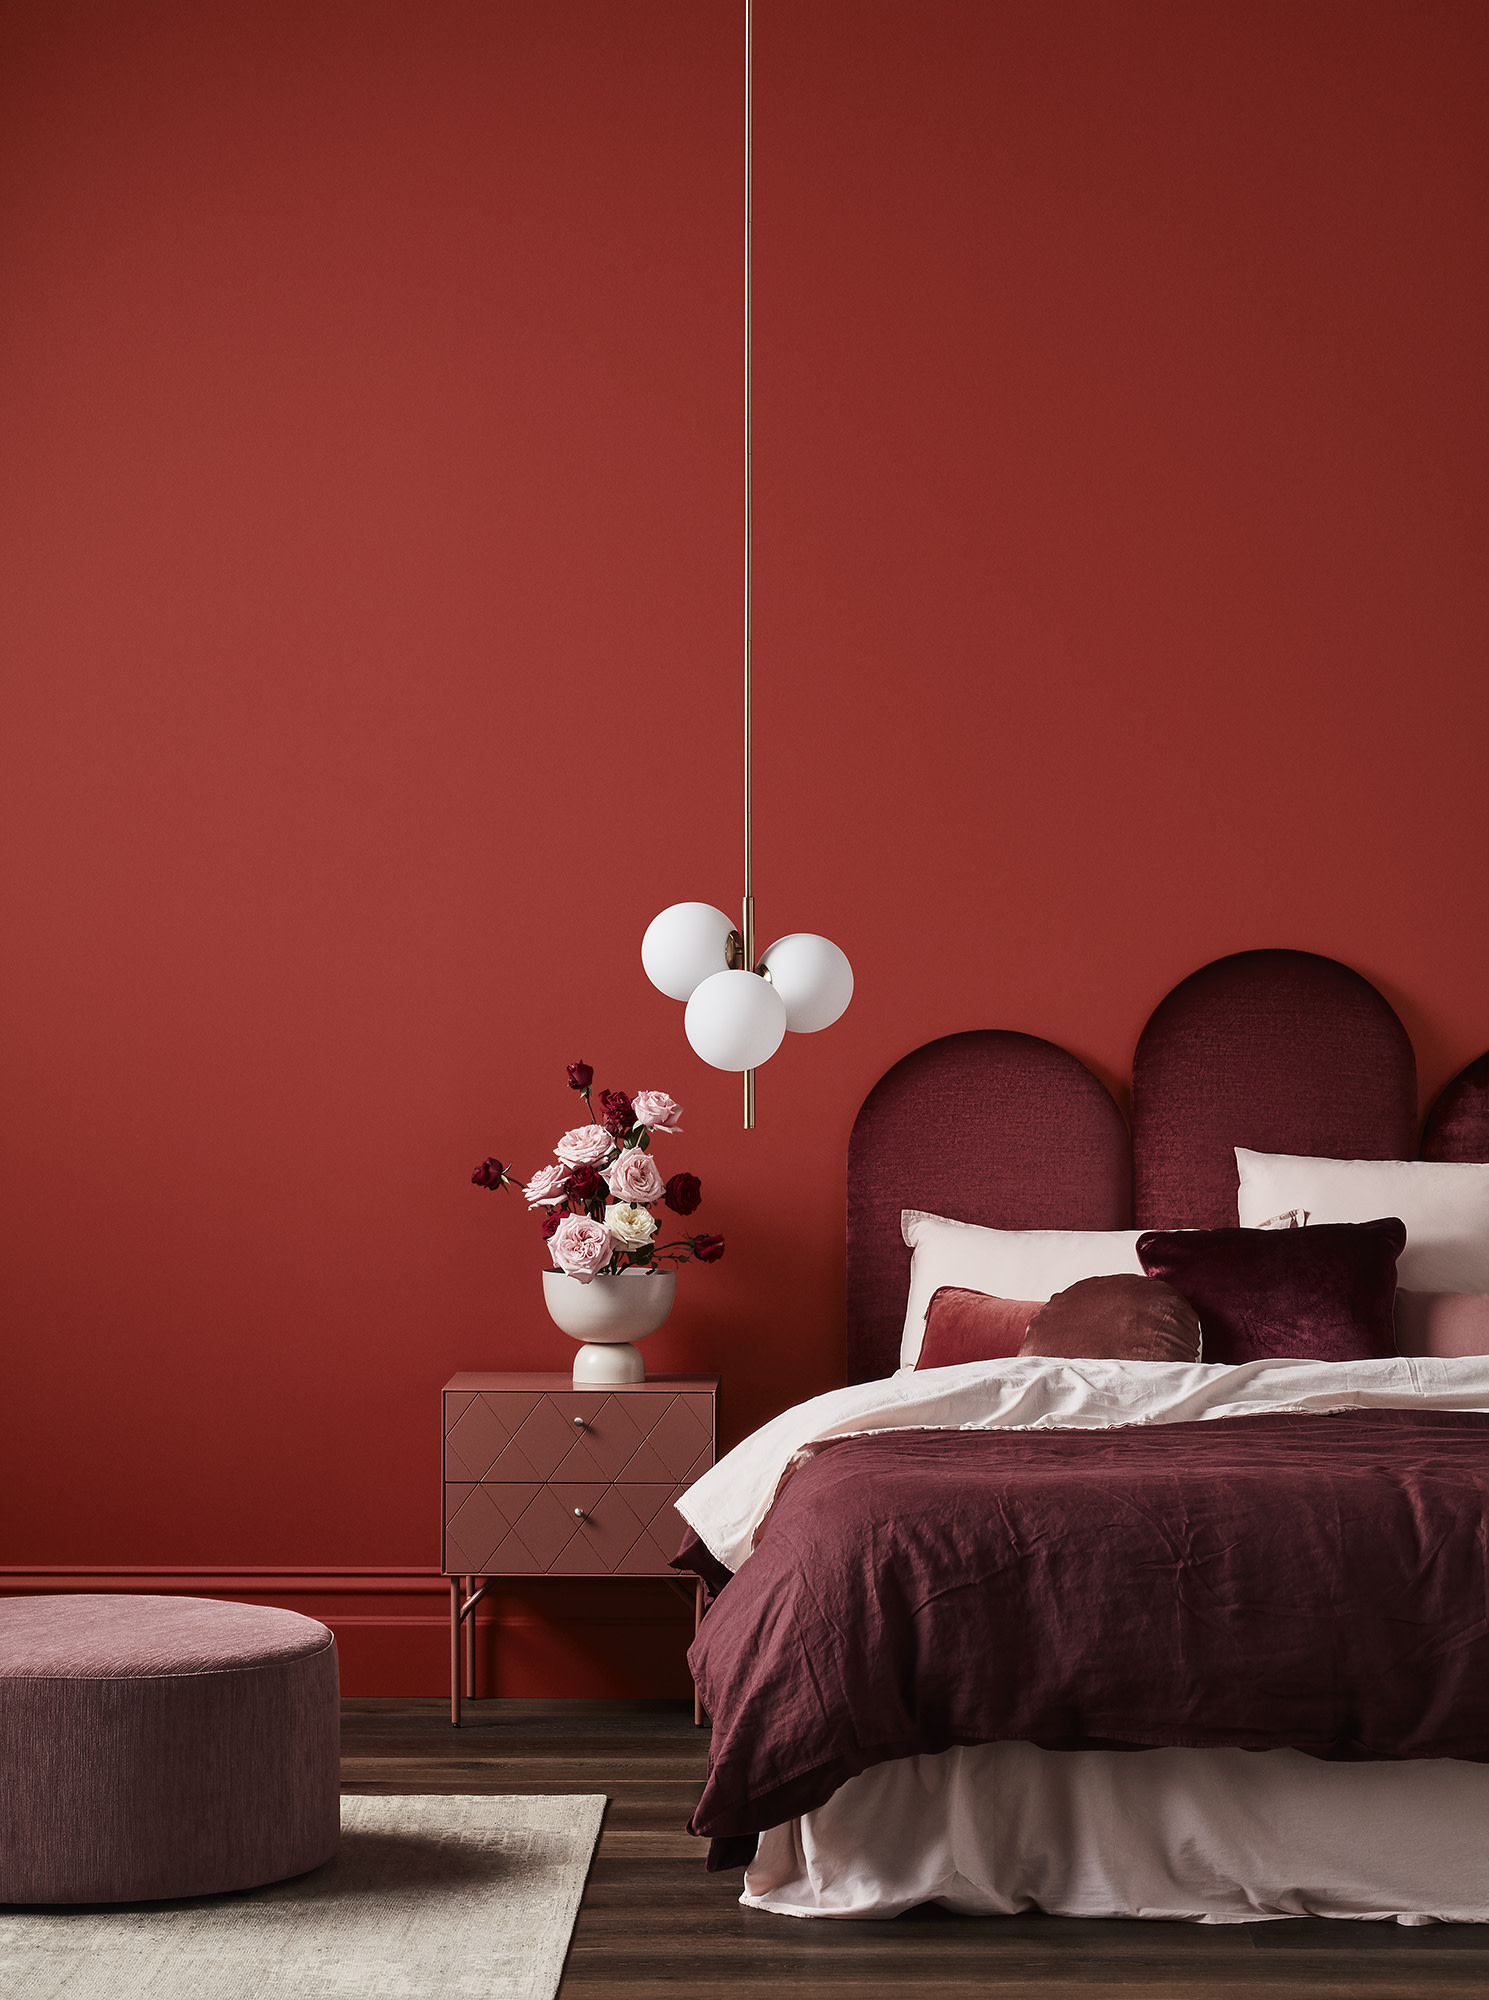 Red wall paint combinations can add warmth, drama, and personality to any room, but choosing the right combinations and decor